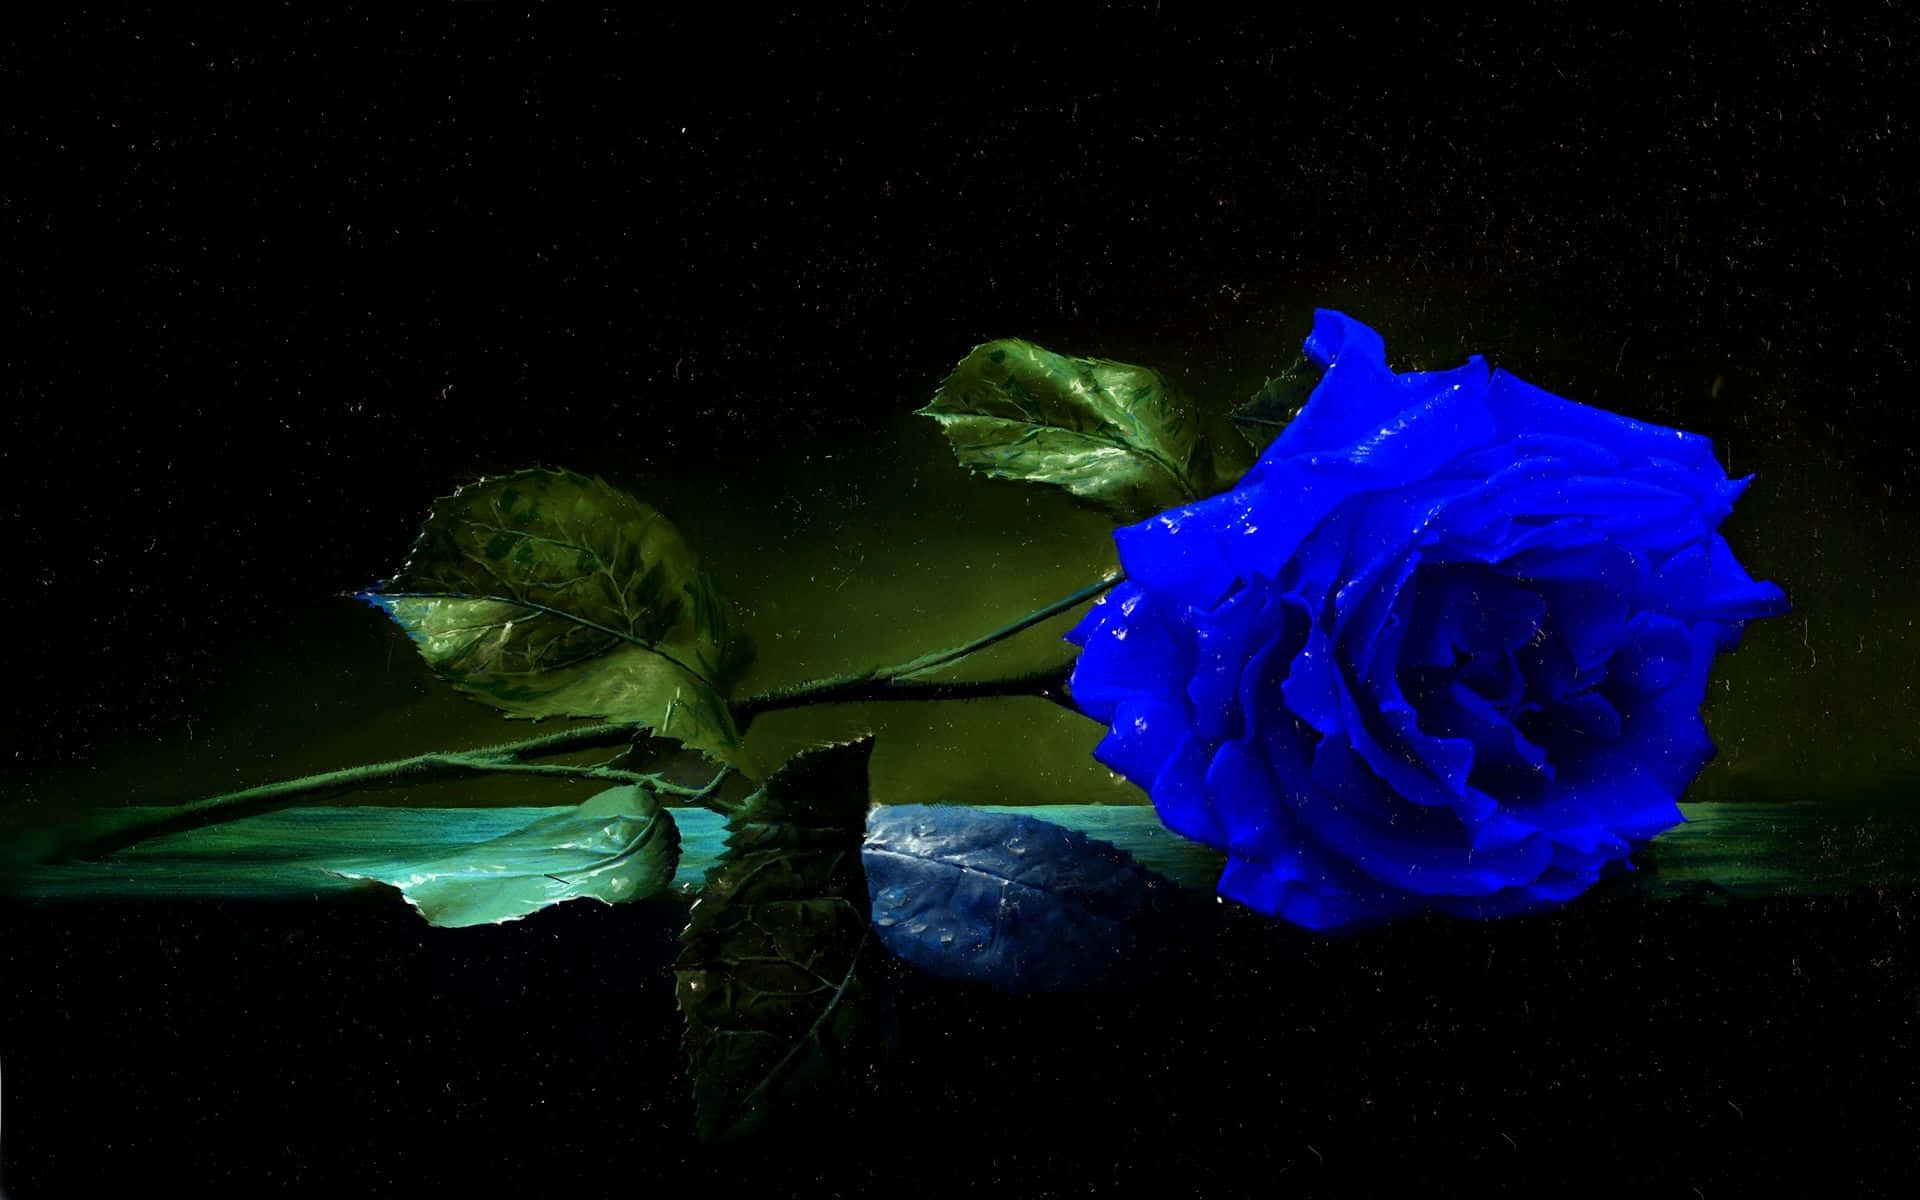 A Stunning Blue Rose, Symbolizing The Rare And Mysterious. Background